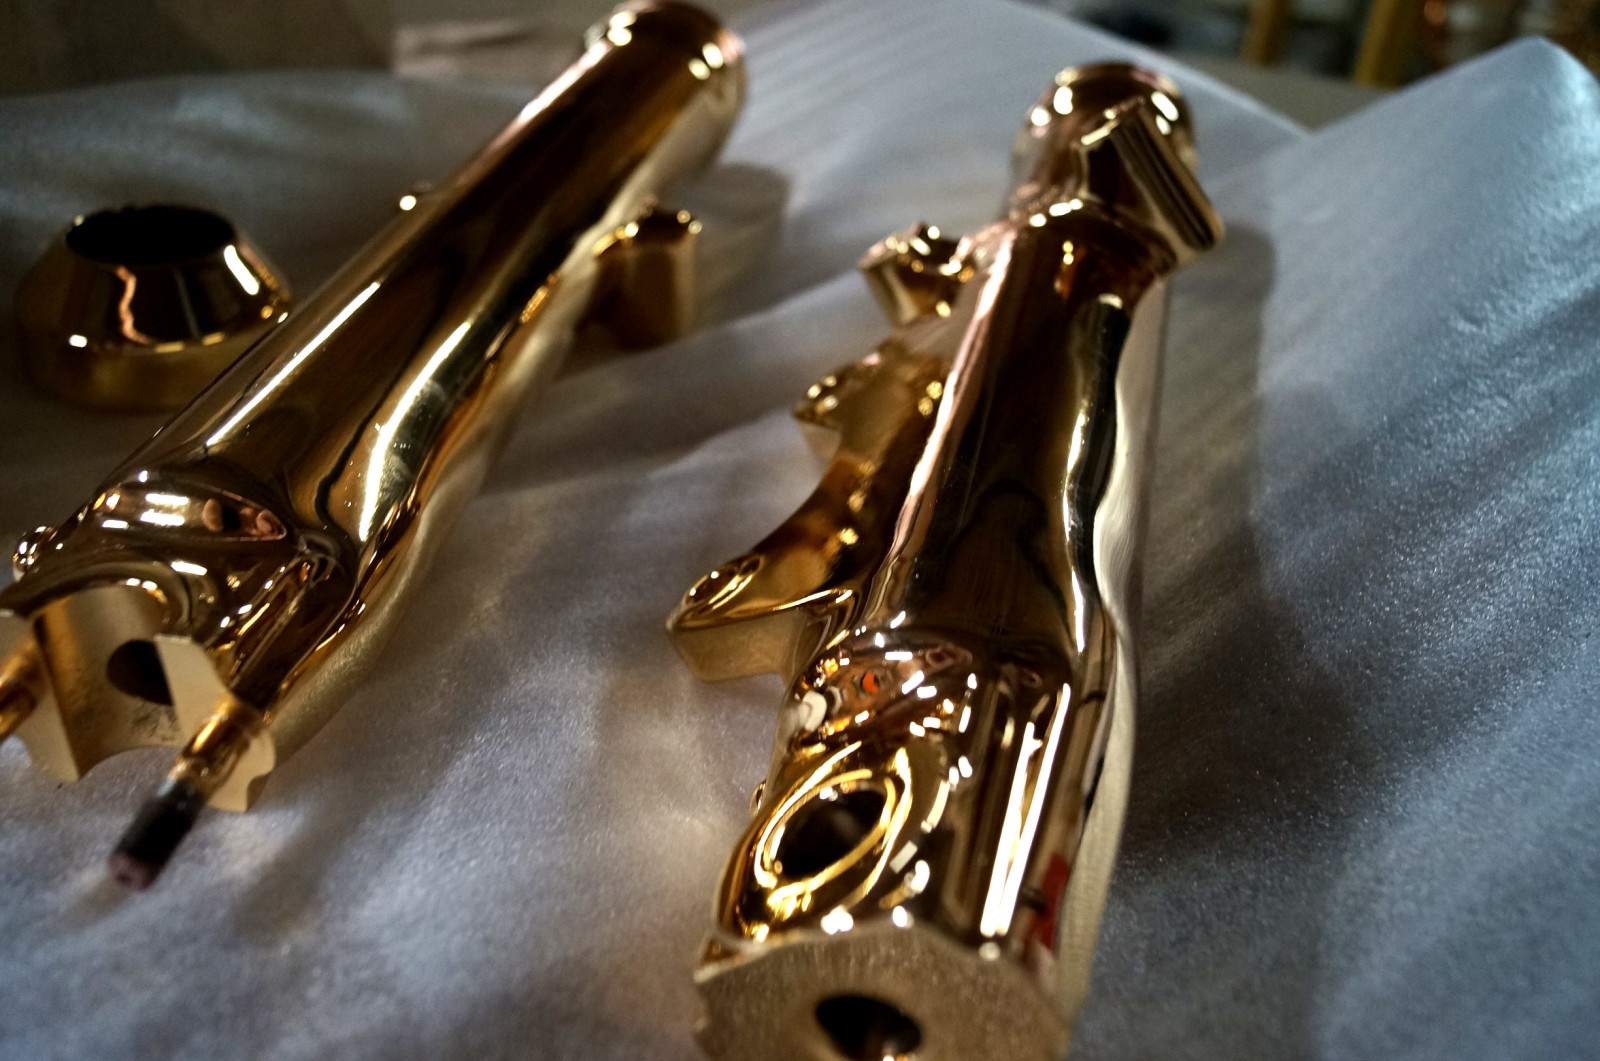 Mirror polished & Gold plated lower forks 